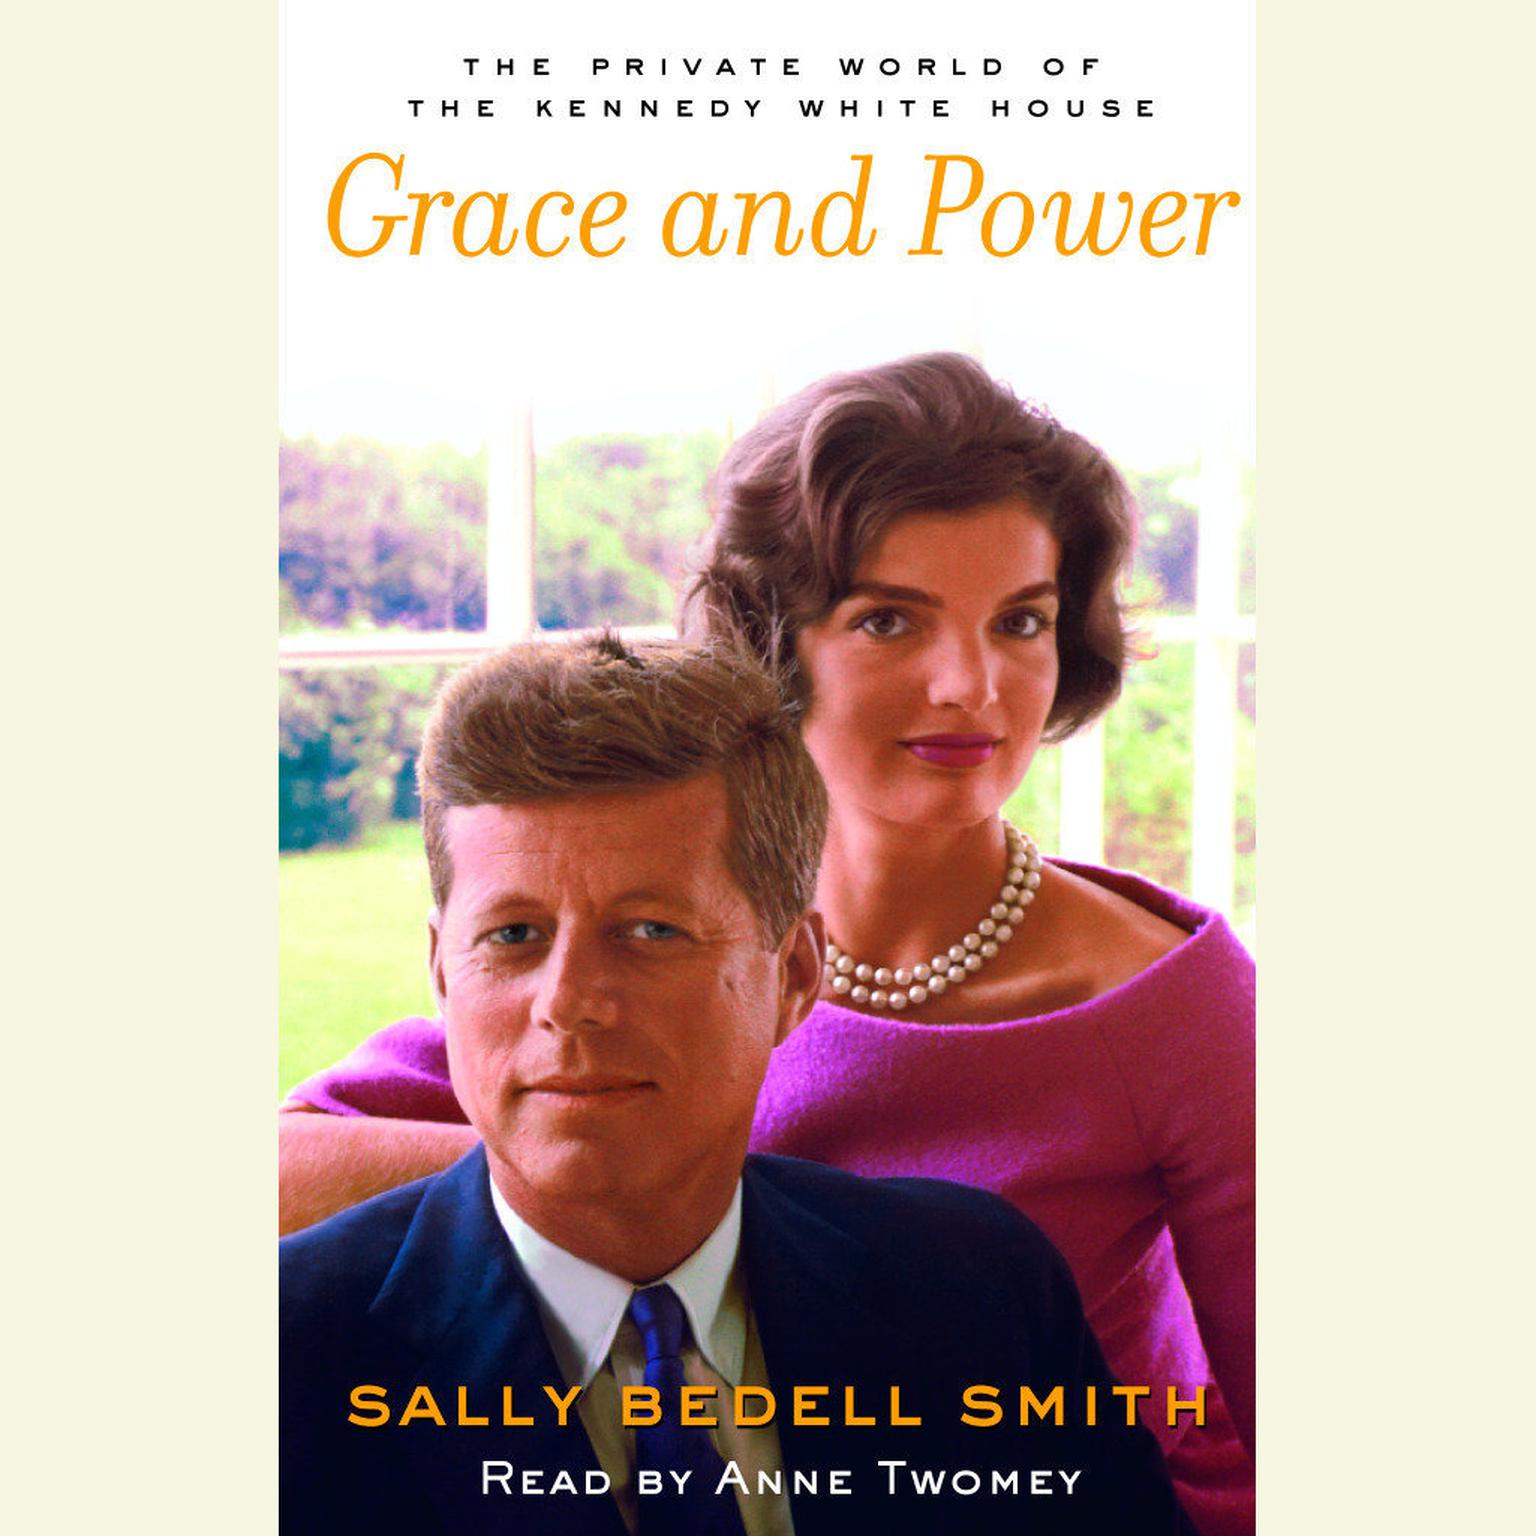 Grace and Power (Abridged): The Private World of the Kennedy White House Audiobook, by Sally Bedell Smith